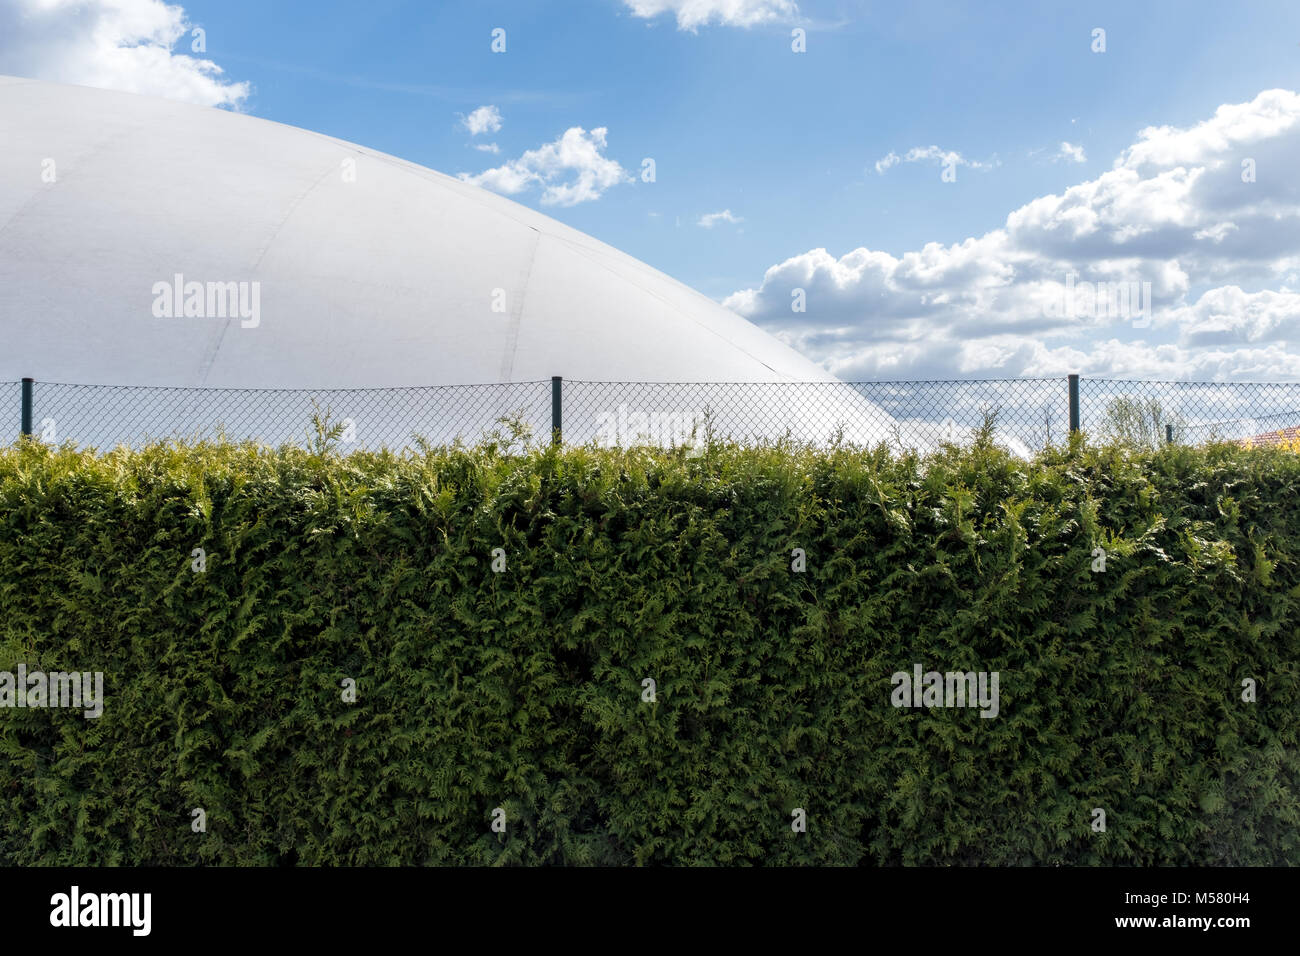 Inflatable tennis hall behind a fence and a hedge, bue sky with some clouds in the background. Stock Photo